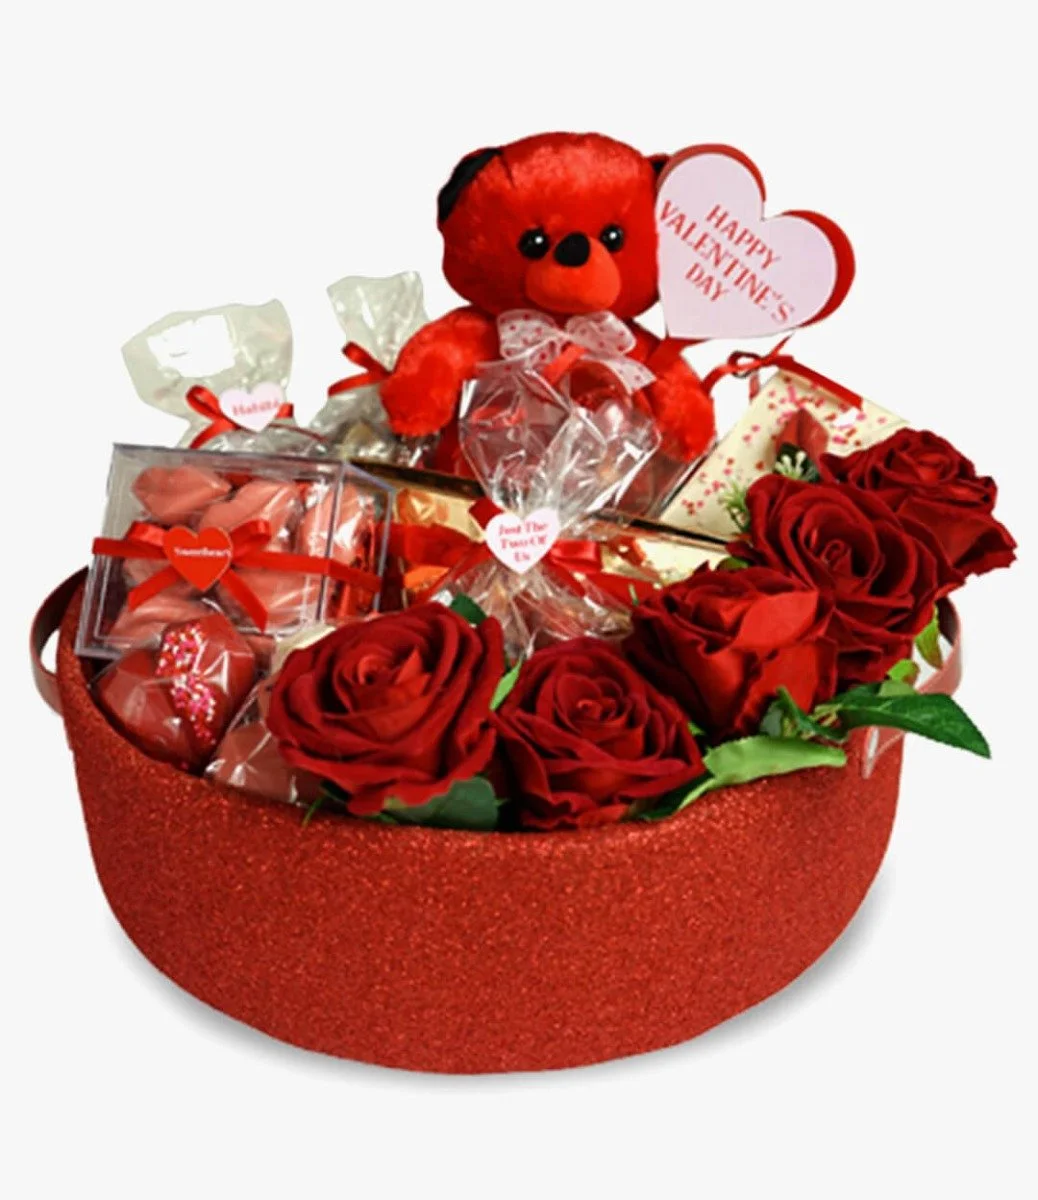 Date Night - Chocolate Hamper By Blessing